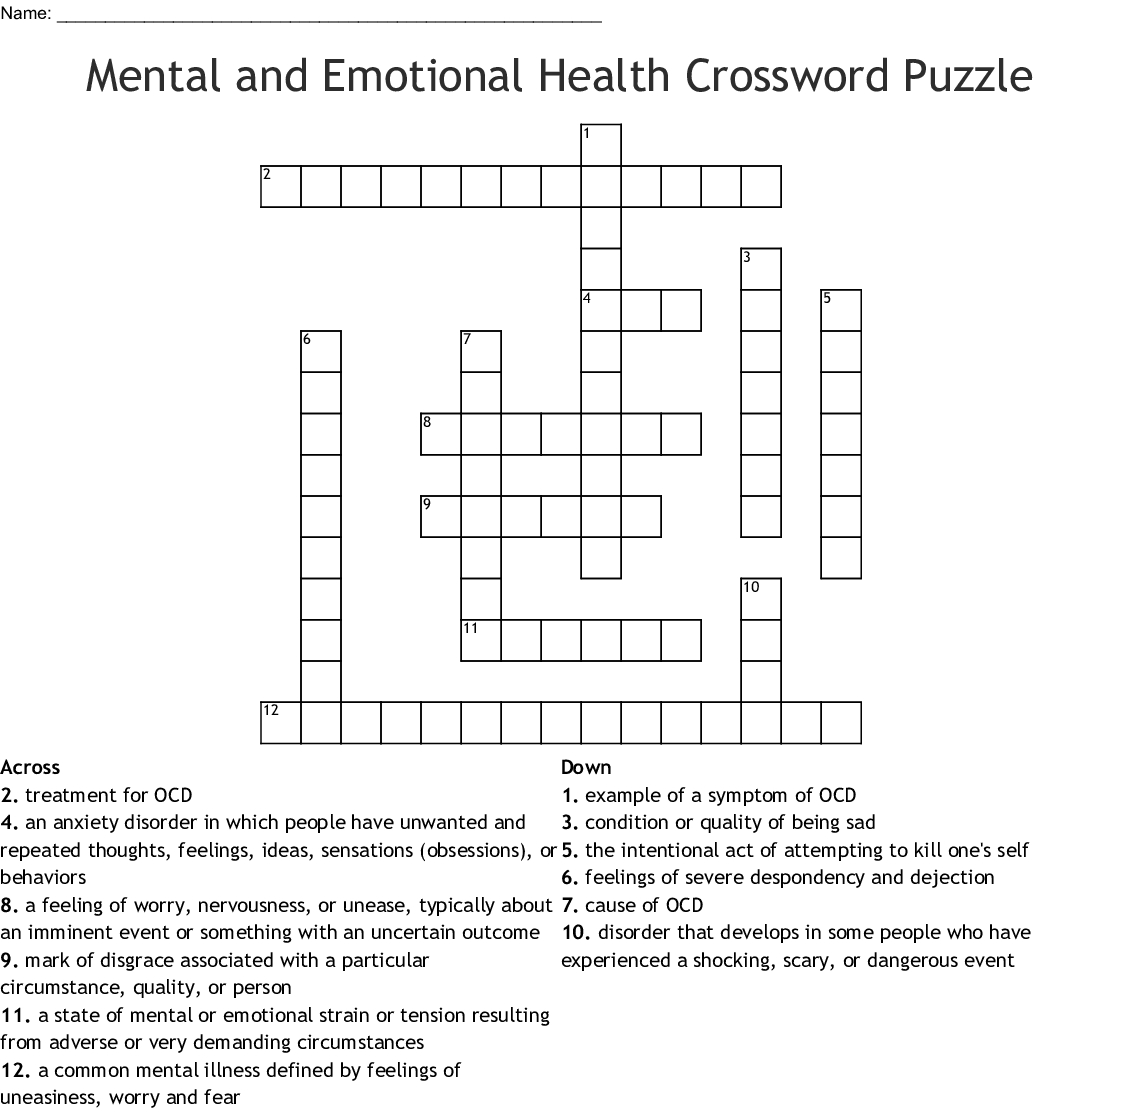 Mental And Emotional Health Crossword Puzzle Crossword - Wordmint - Printable Crossword Puzzles For Mental Health